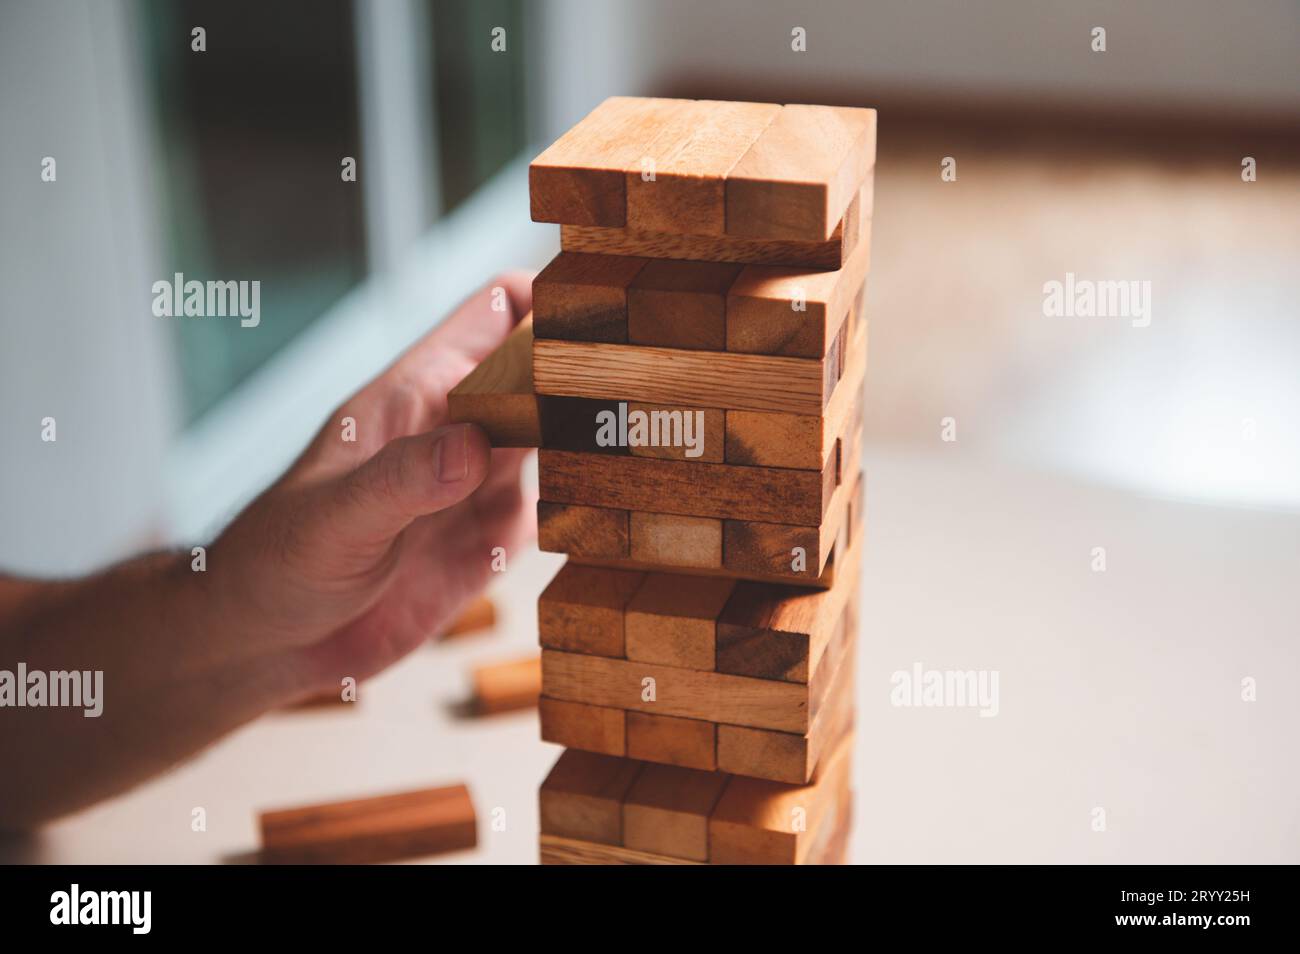 Wooden blocks toy puzzle with human hand on table at home background. Entertainment and business concept. Stock Photo